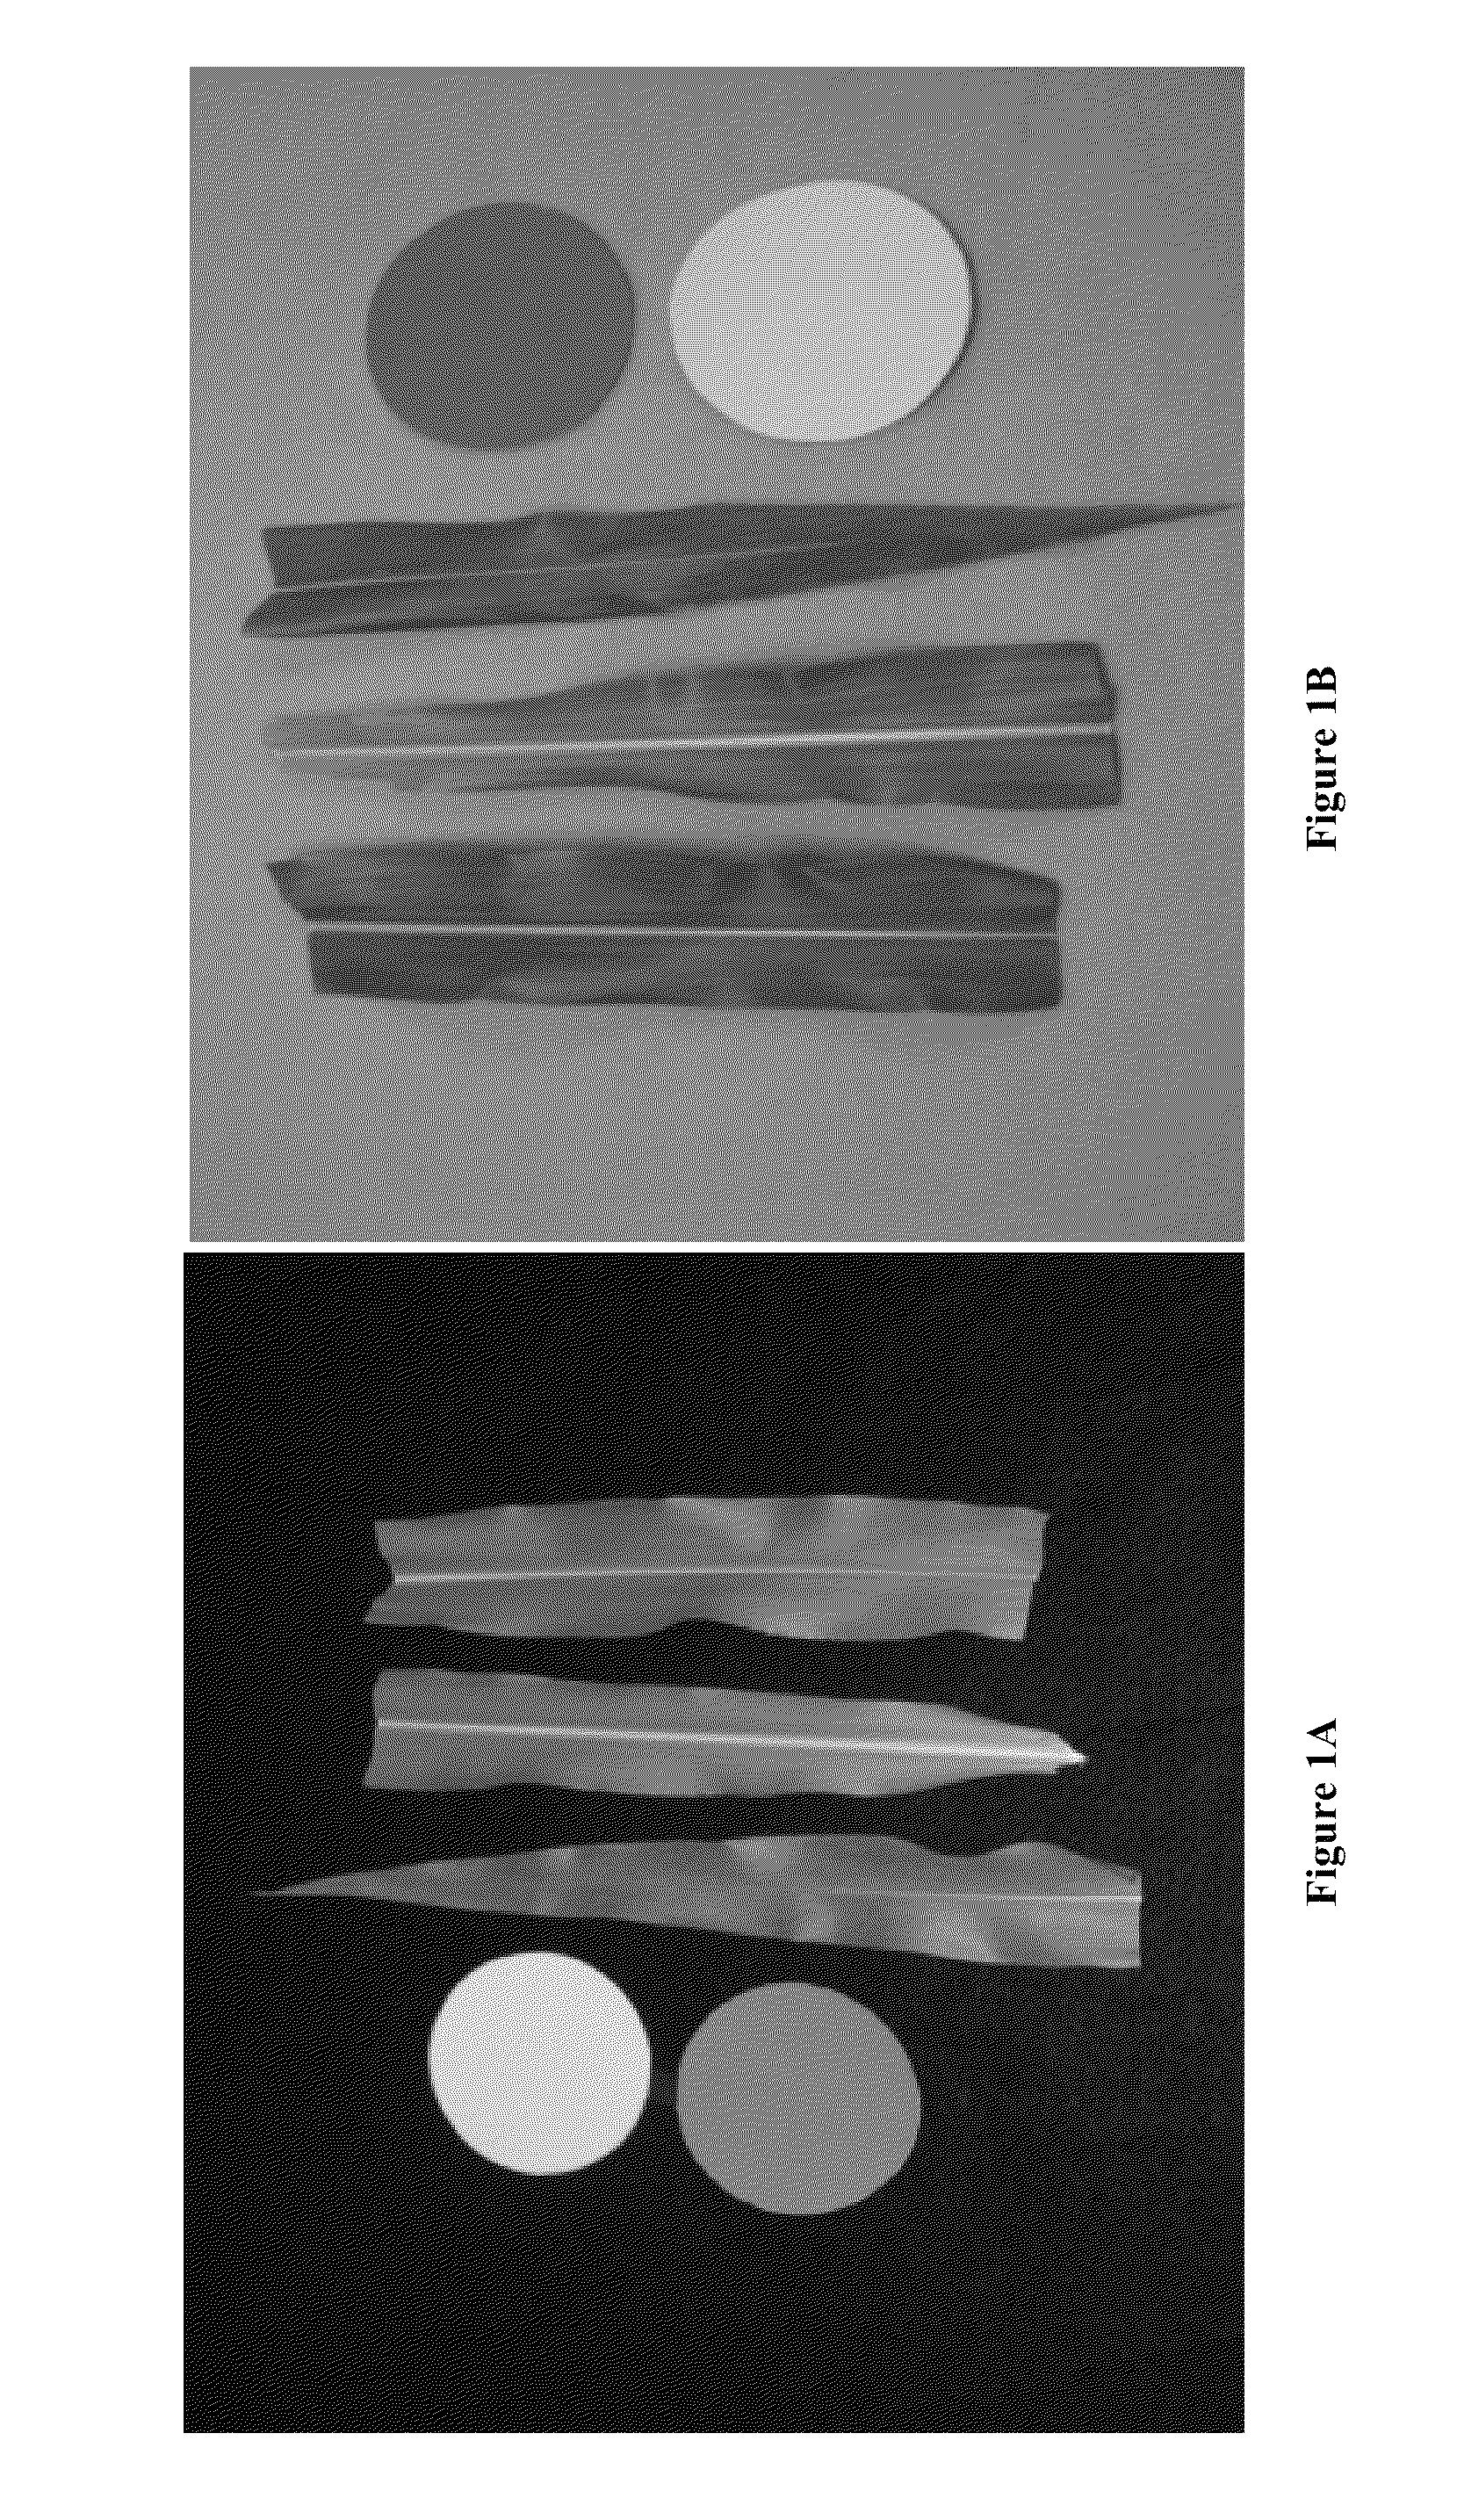 System and method of determining nitrogen levels from a digital image